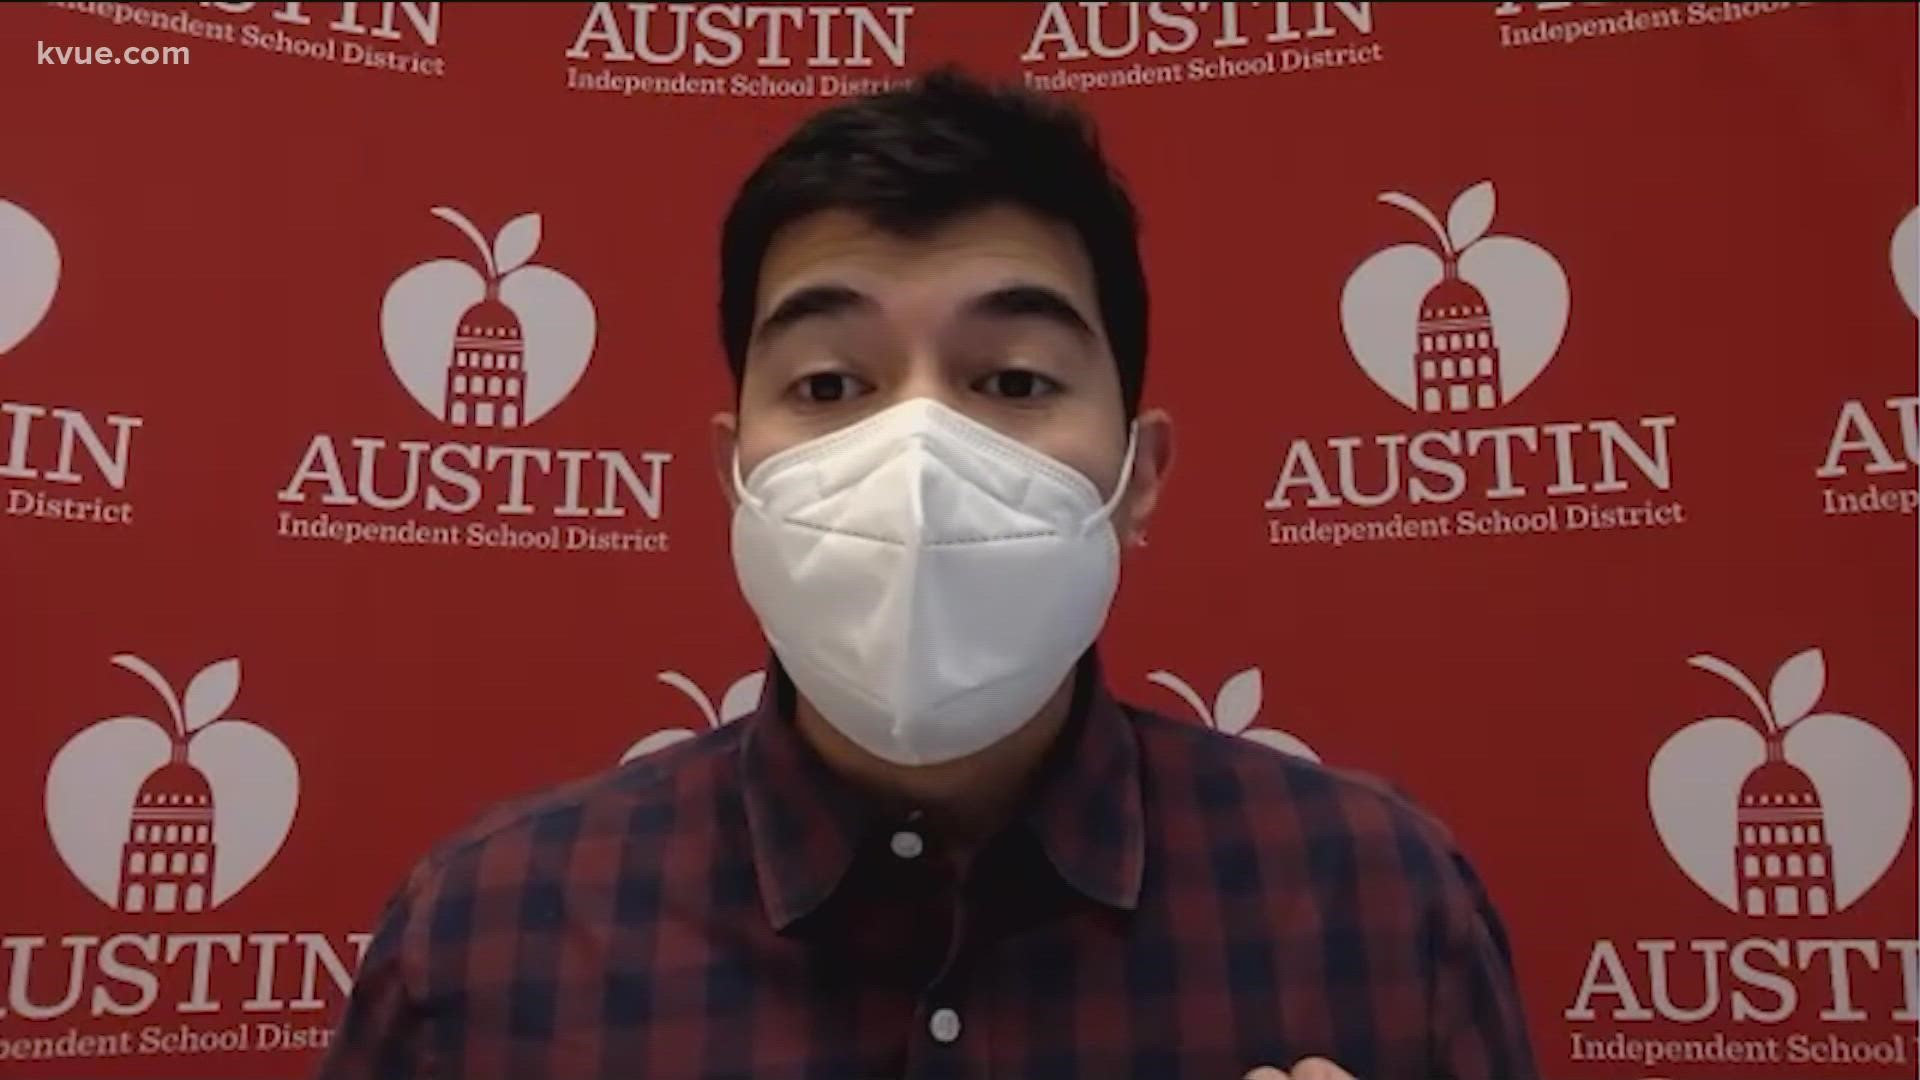 With COVID-19 still spreading in our community, Austin ISD is now excusing any pandemic-related absences. It's the first Central Texas district to do so.